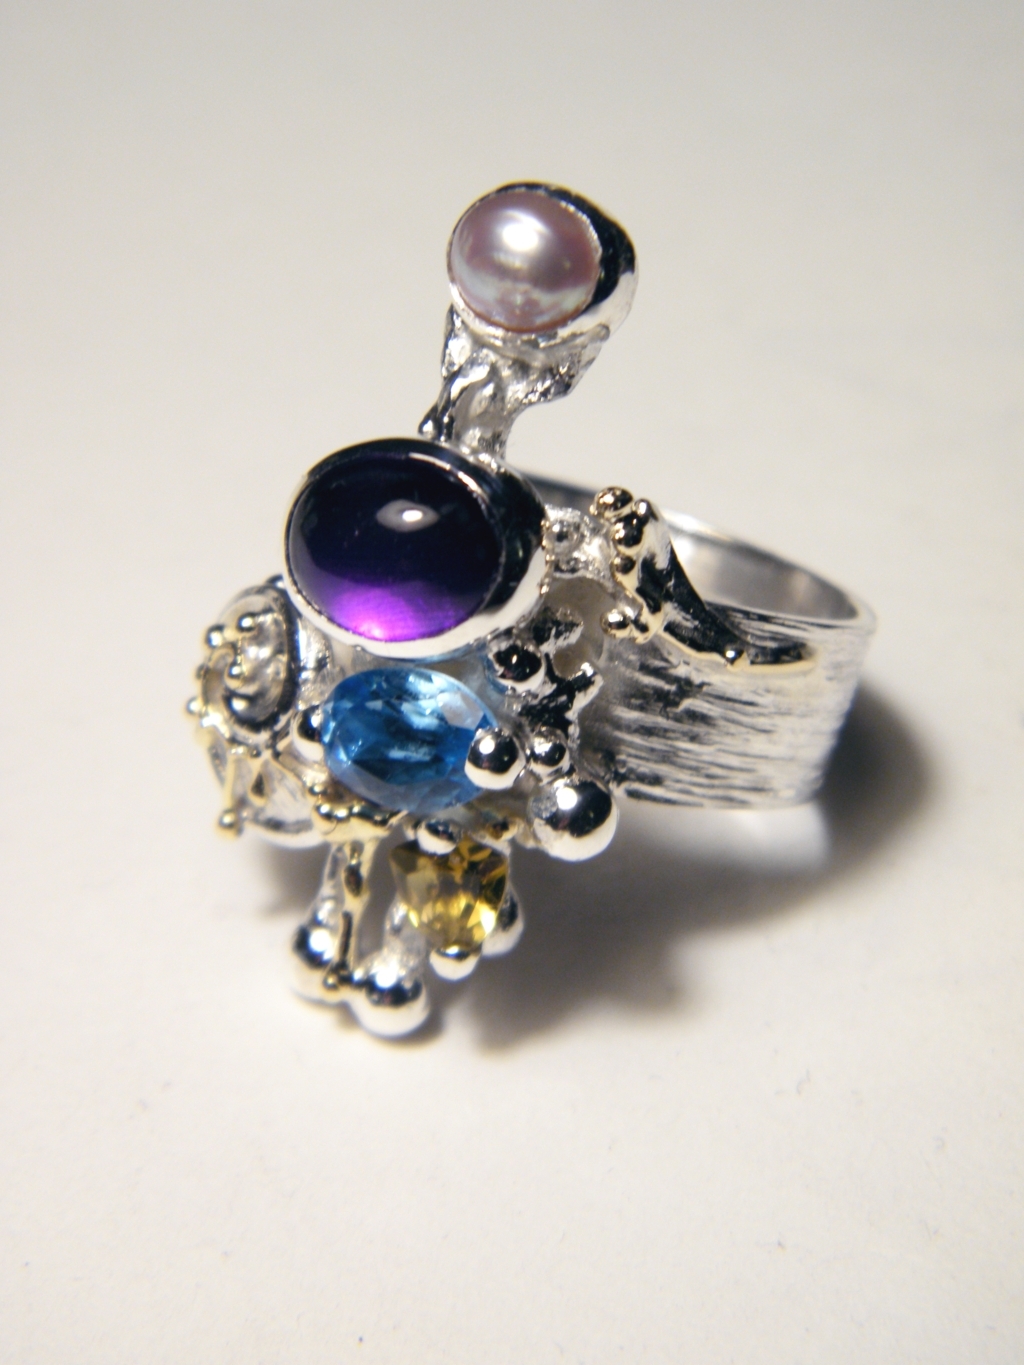 gregory pyra piro one of a kind ring 4020, mixed metal one of a kind jewellery, silver and gold mixed metal jewellery, rings for women with blue topaz and pearl, rings for women with amethyst and peridot, rings for women with blue topaz and peridot, rings for women with amethyst and blue topaz, rings in art and craft galleries